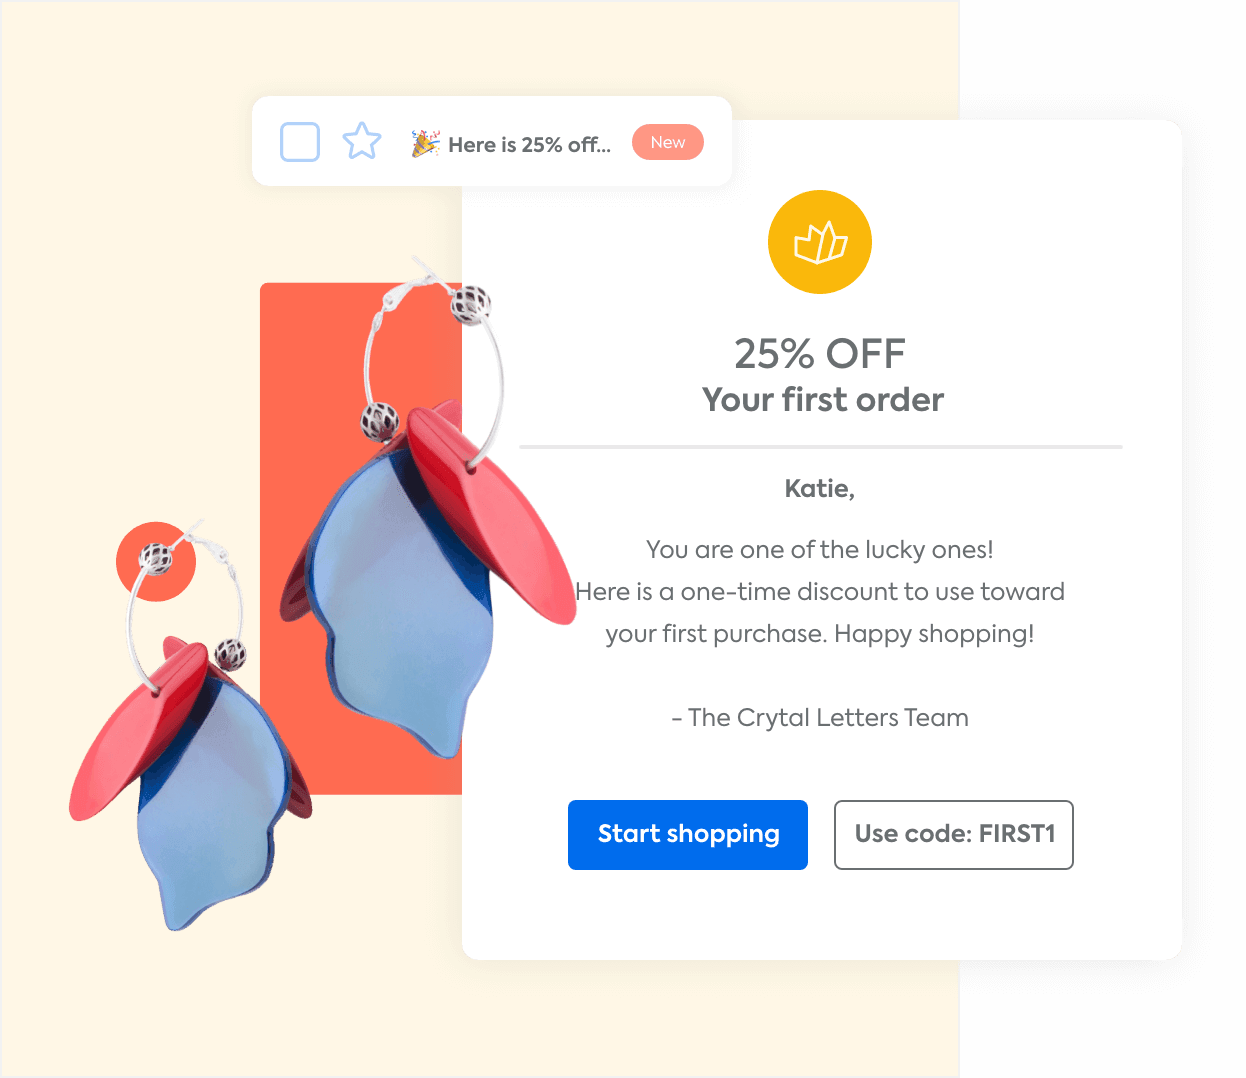 An automated marketing email offering a discount on a shopper's first order and a pair of earrings